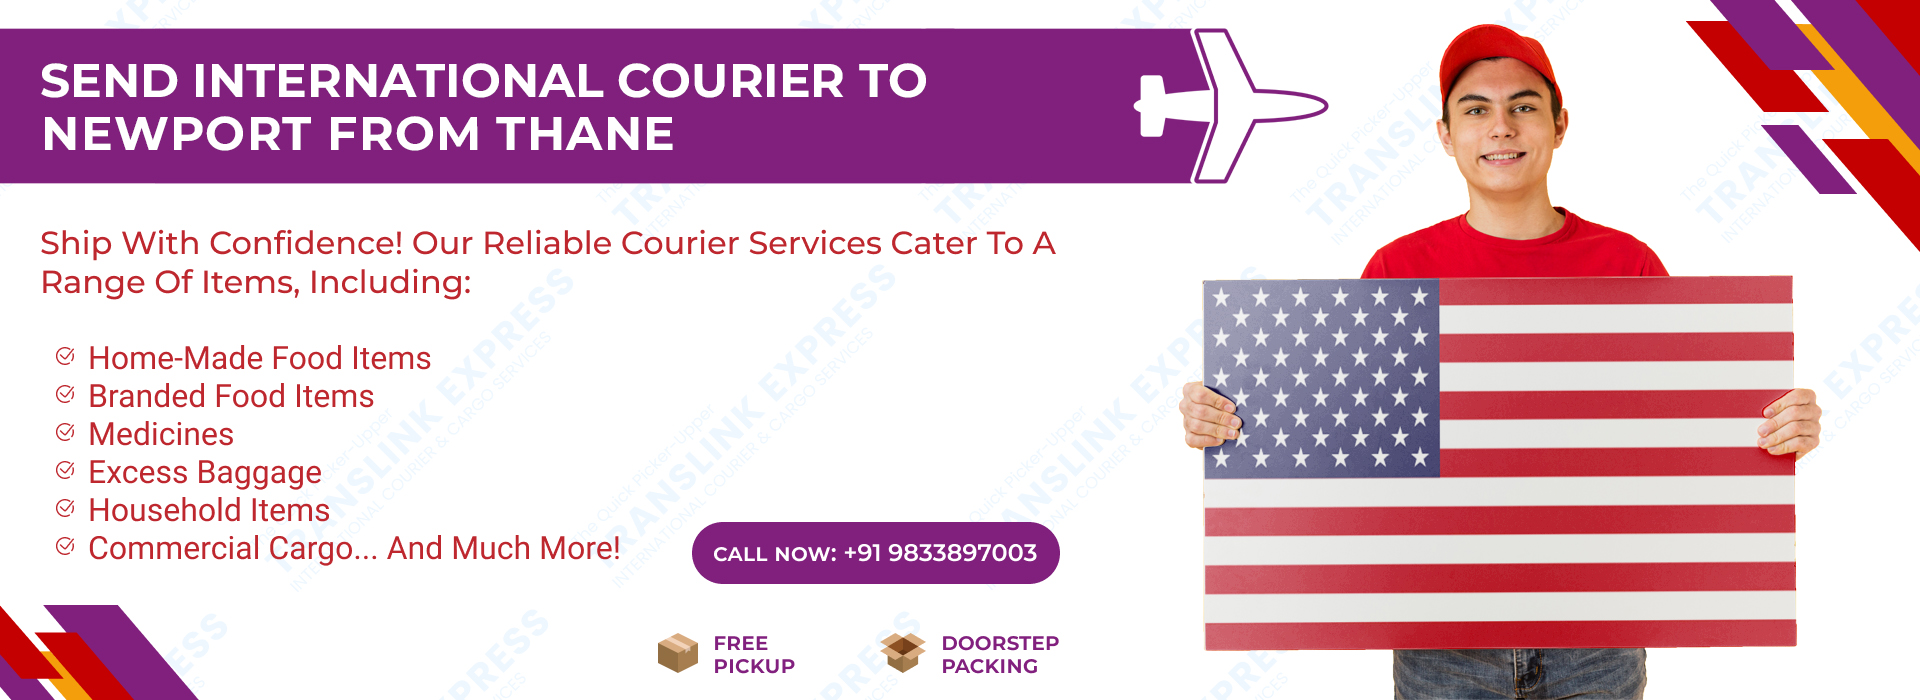 Courier to Newport From Thane